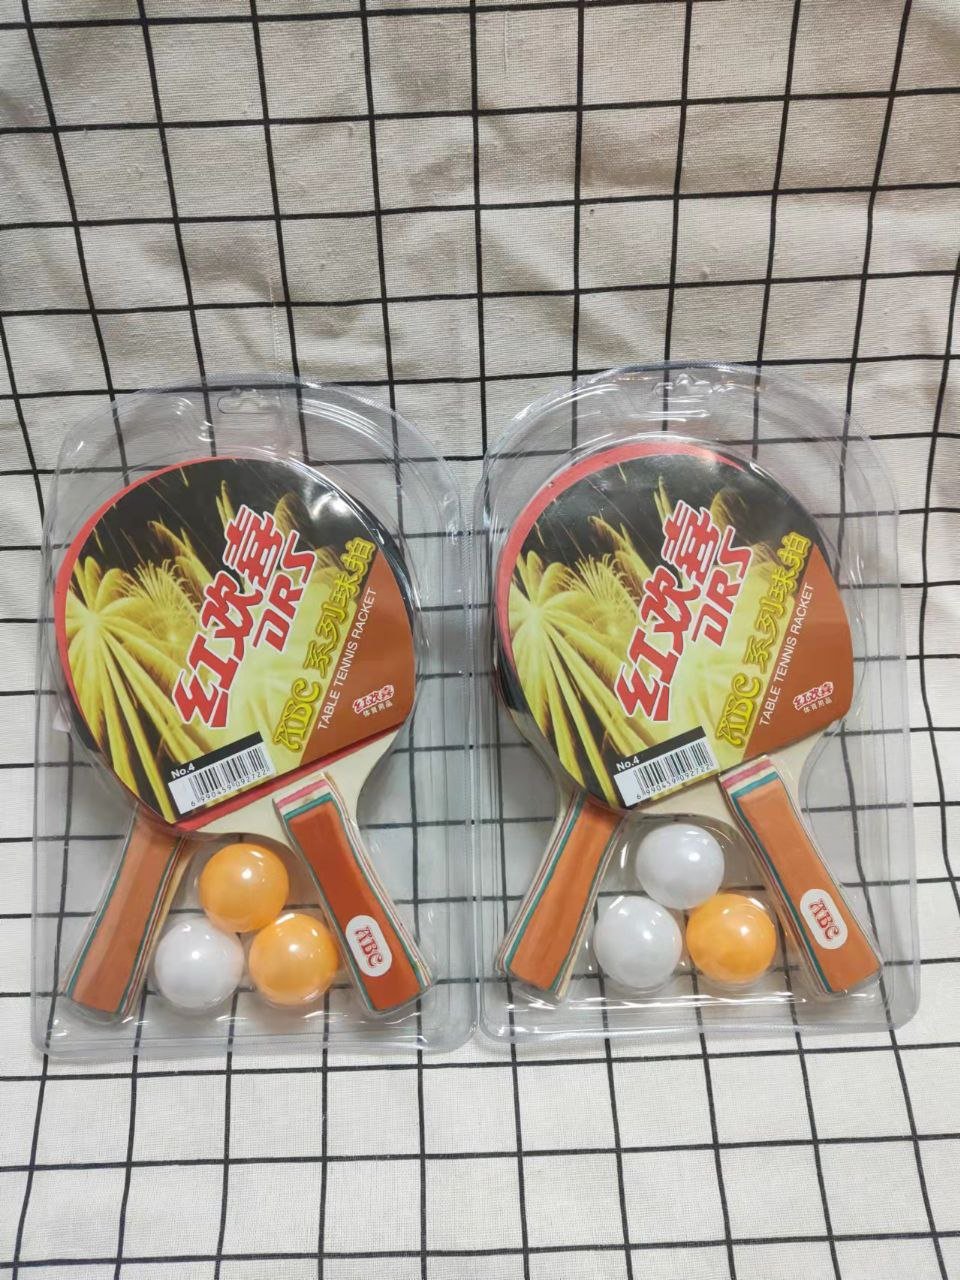 Table Tennis Racket suit with 3 Table Tennis Balls